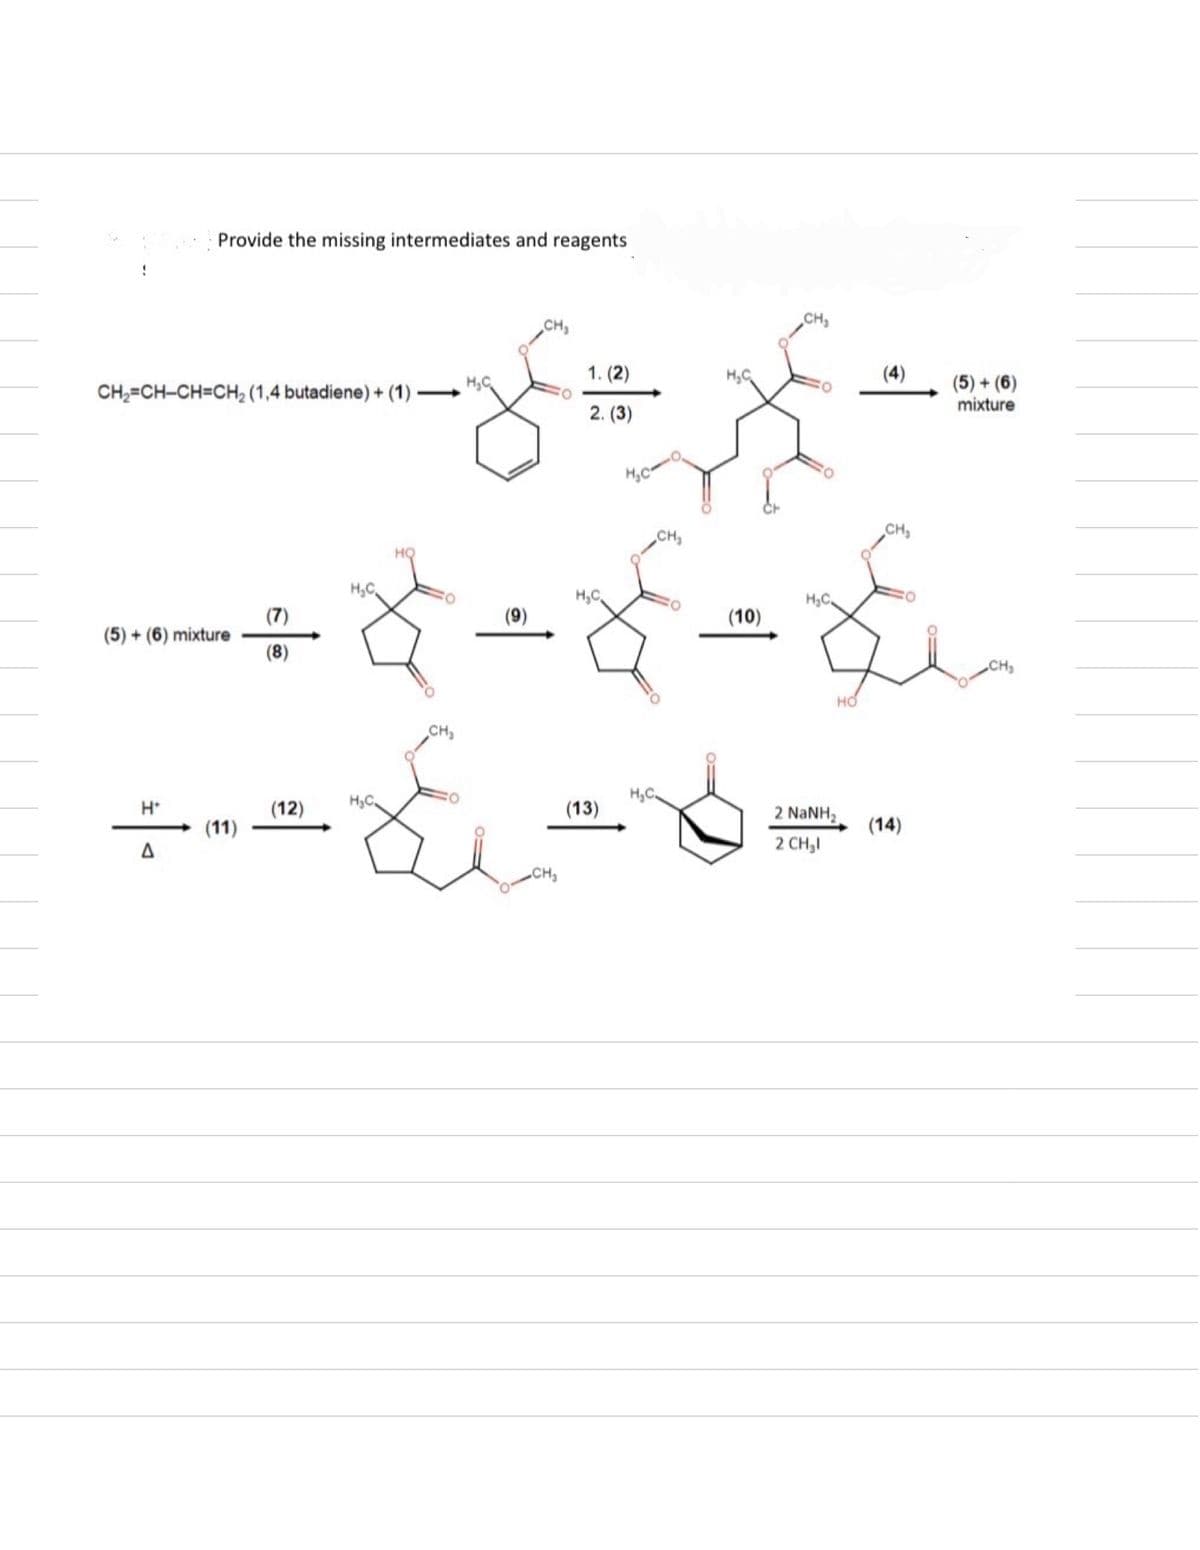 Provide the missing intermediates and reagents
CH
CH2=CH-CH=CH2 (1,4 butadiene) + (1).
H.C
1. (2)
H.C
2. (3)
H₂C
HQ
H.C
(7)
(5)+(6) mixture
(8)
H*
H.C
(12)
(11)
A
CH₂
CH₂
H.C
CH
CH,
(4)
(5)+(6)
mixture
H₂C
(10)
HO
CH
H,C
(13)
2 NaNH,
(14)
2 CH₂l
CH₂